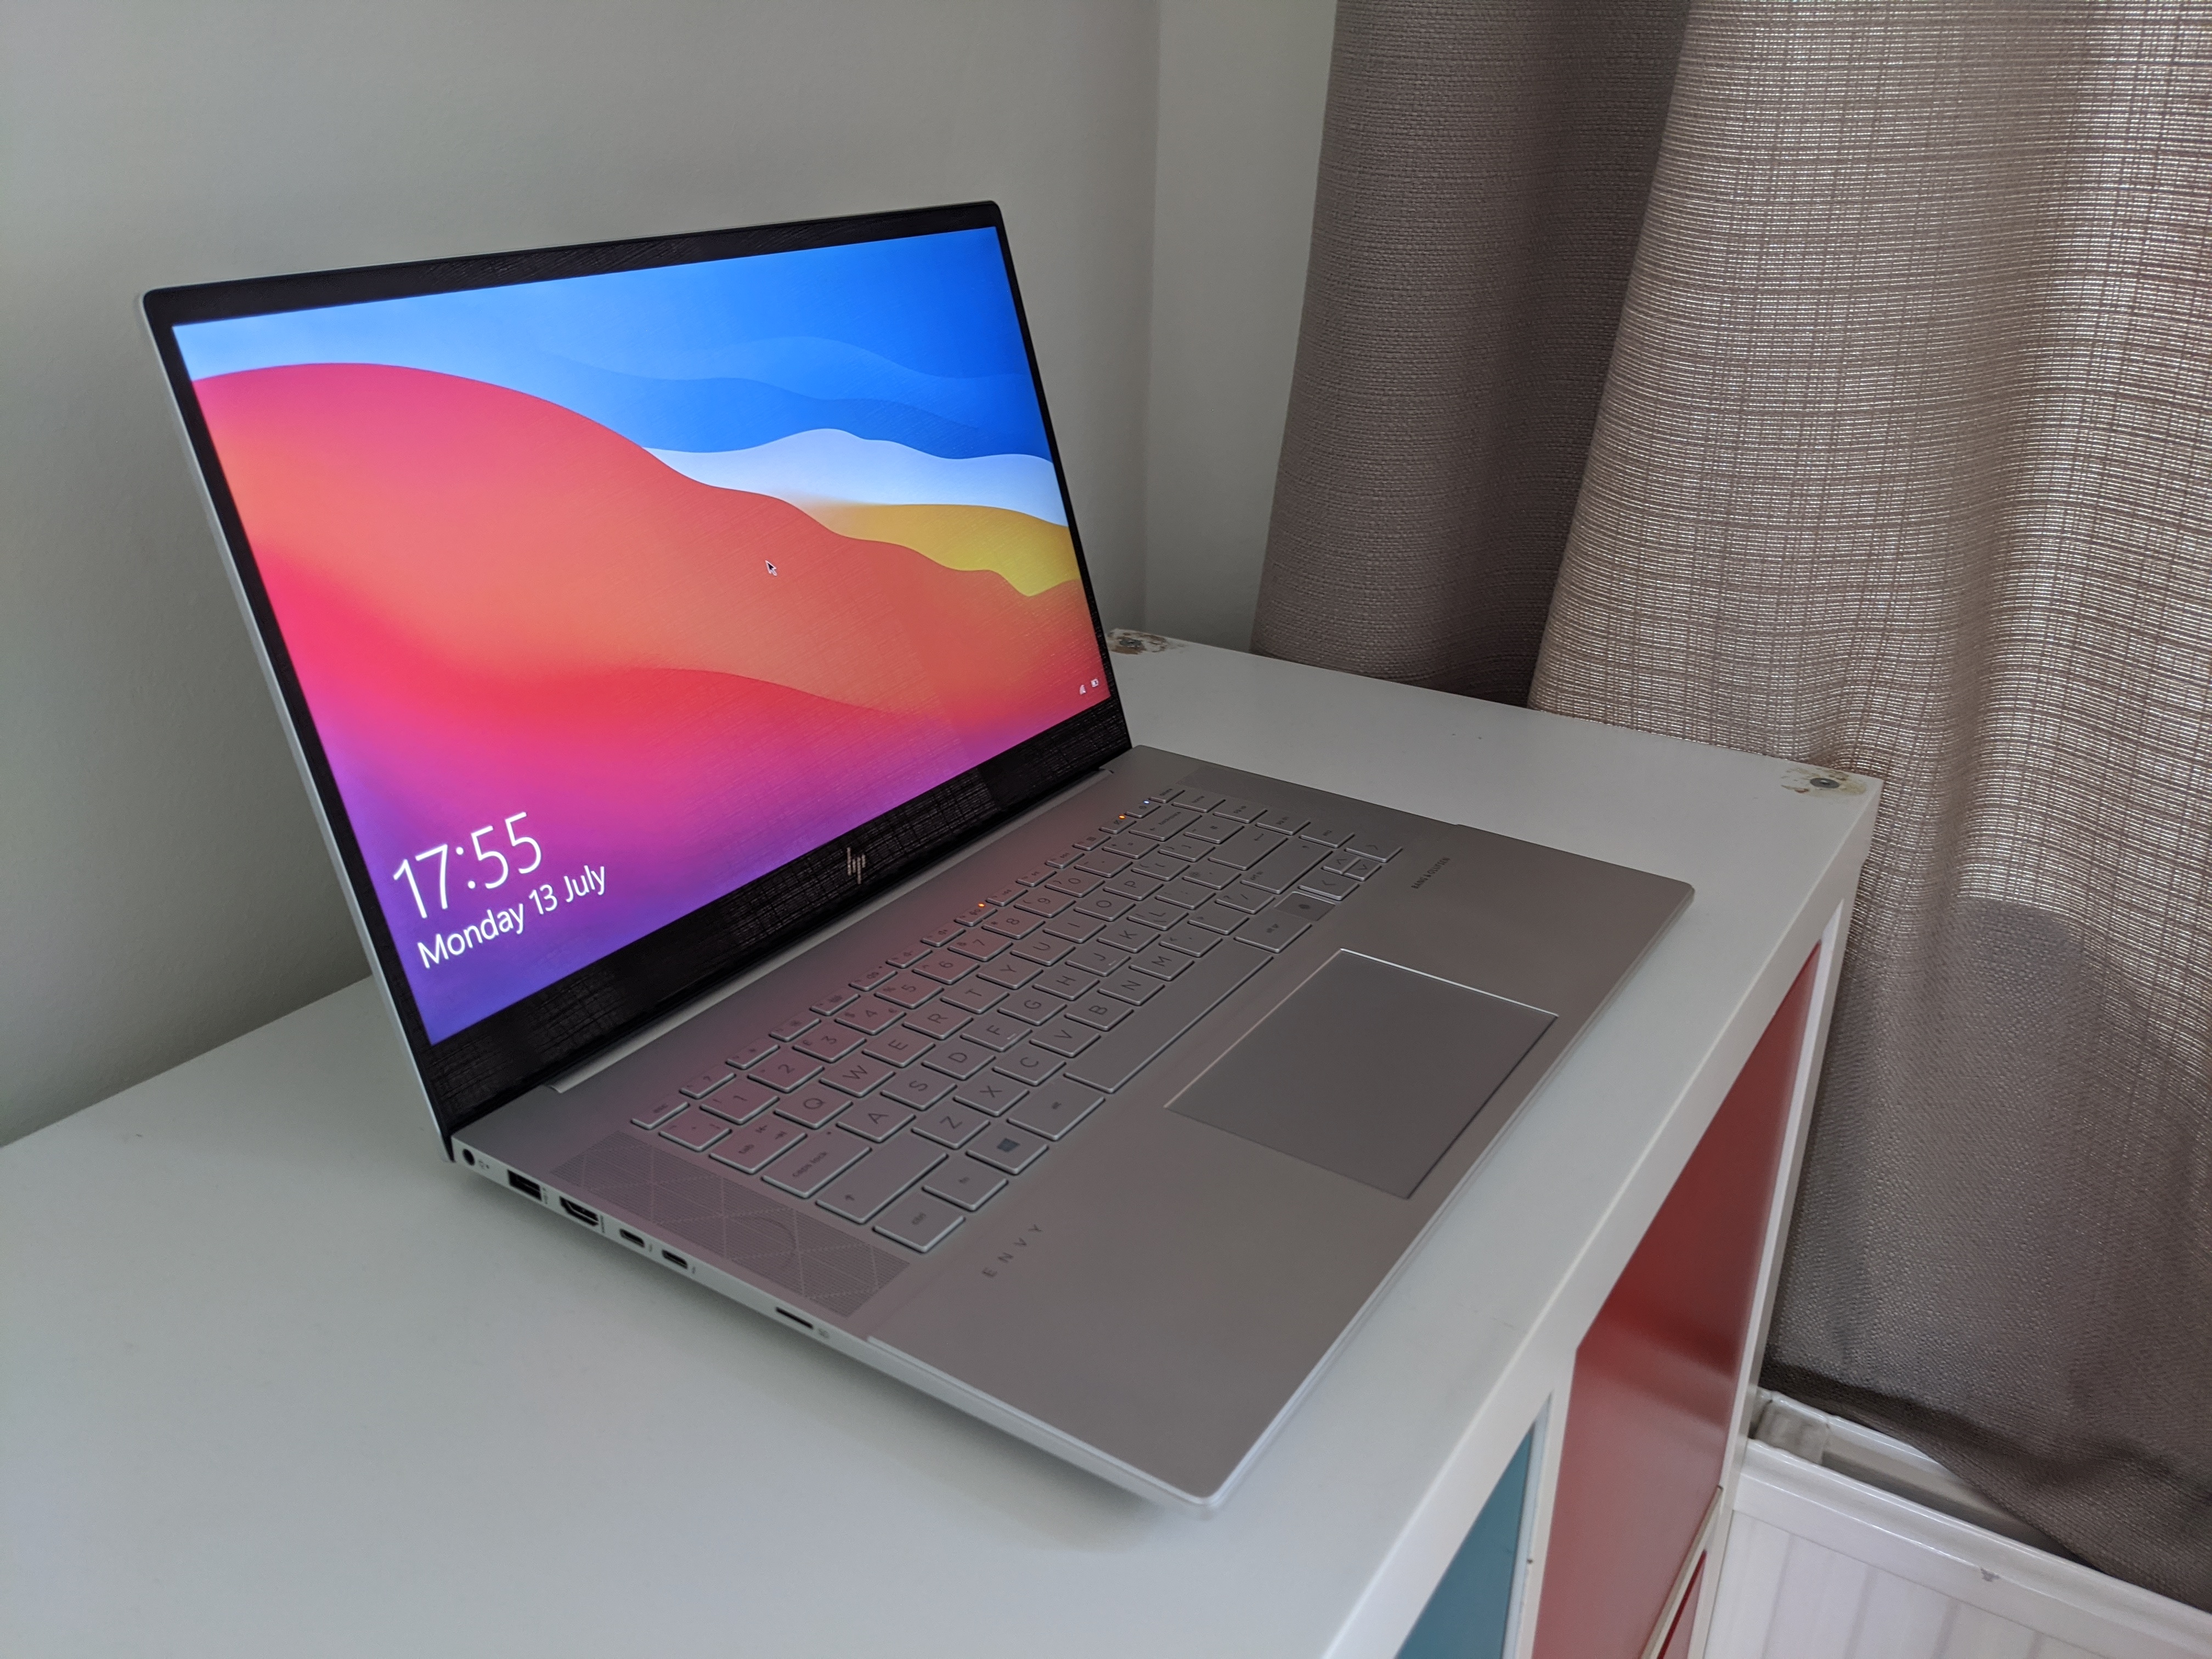 HP Envy 15 2020: First impressions with HP's new